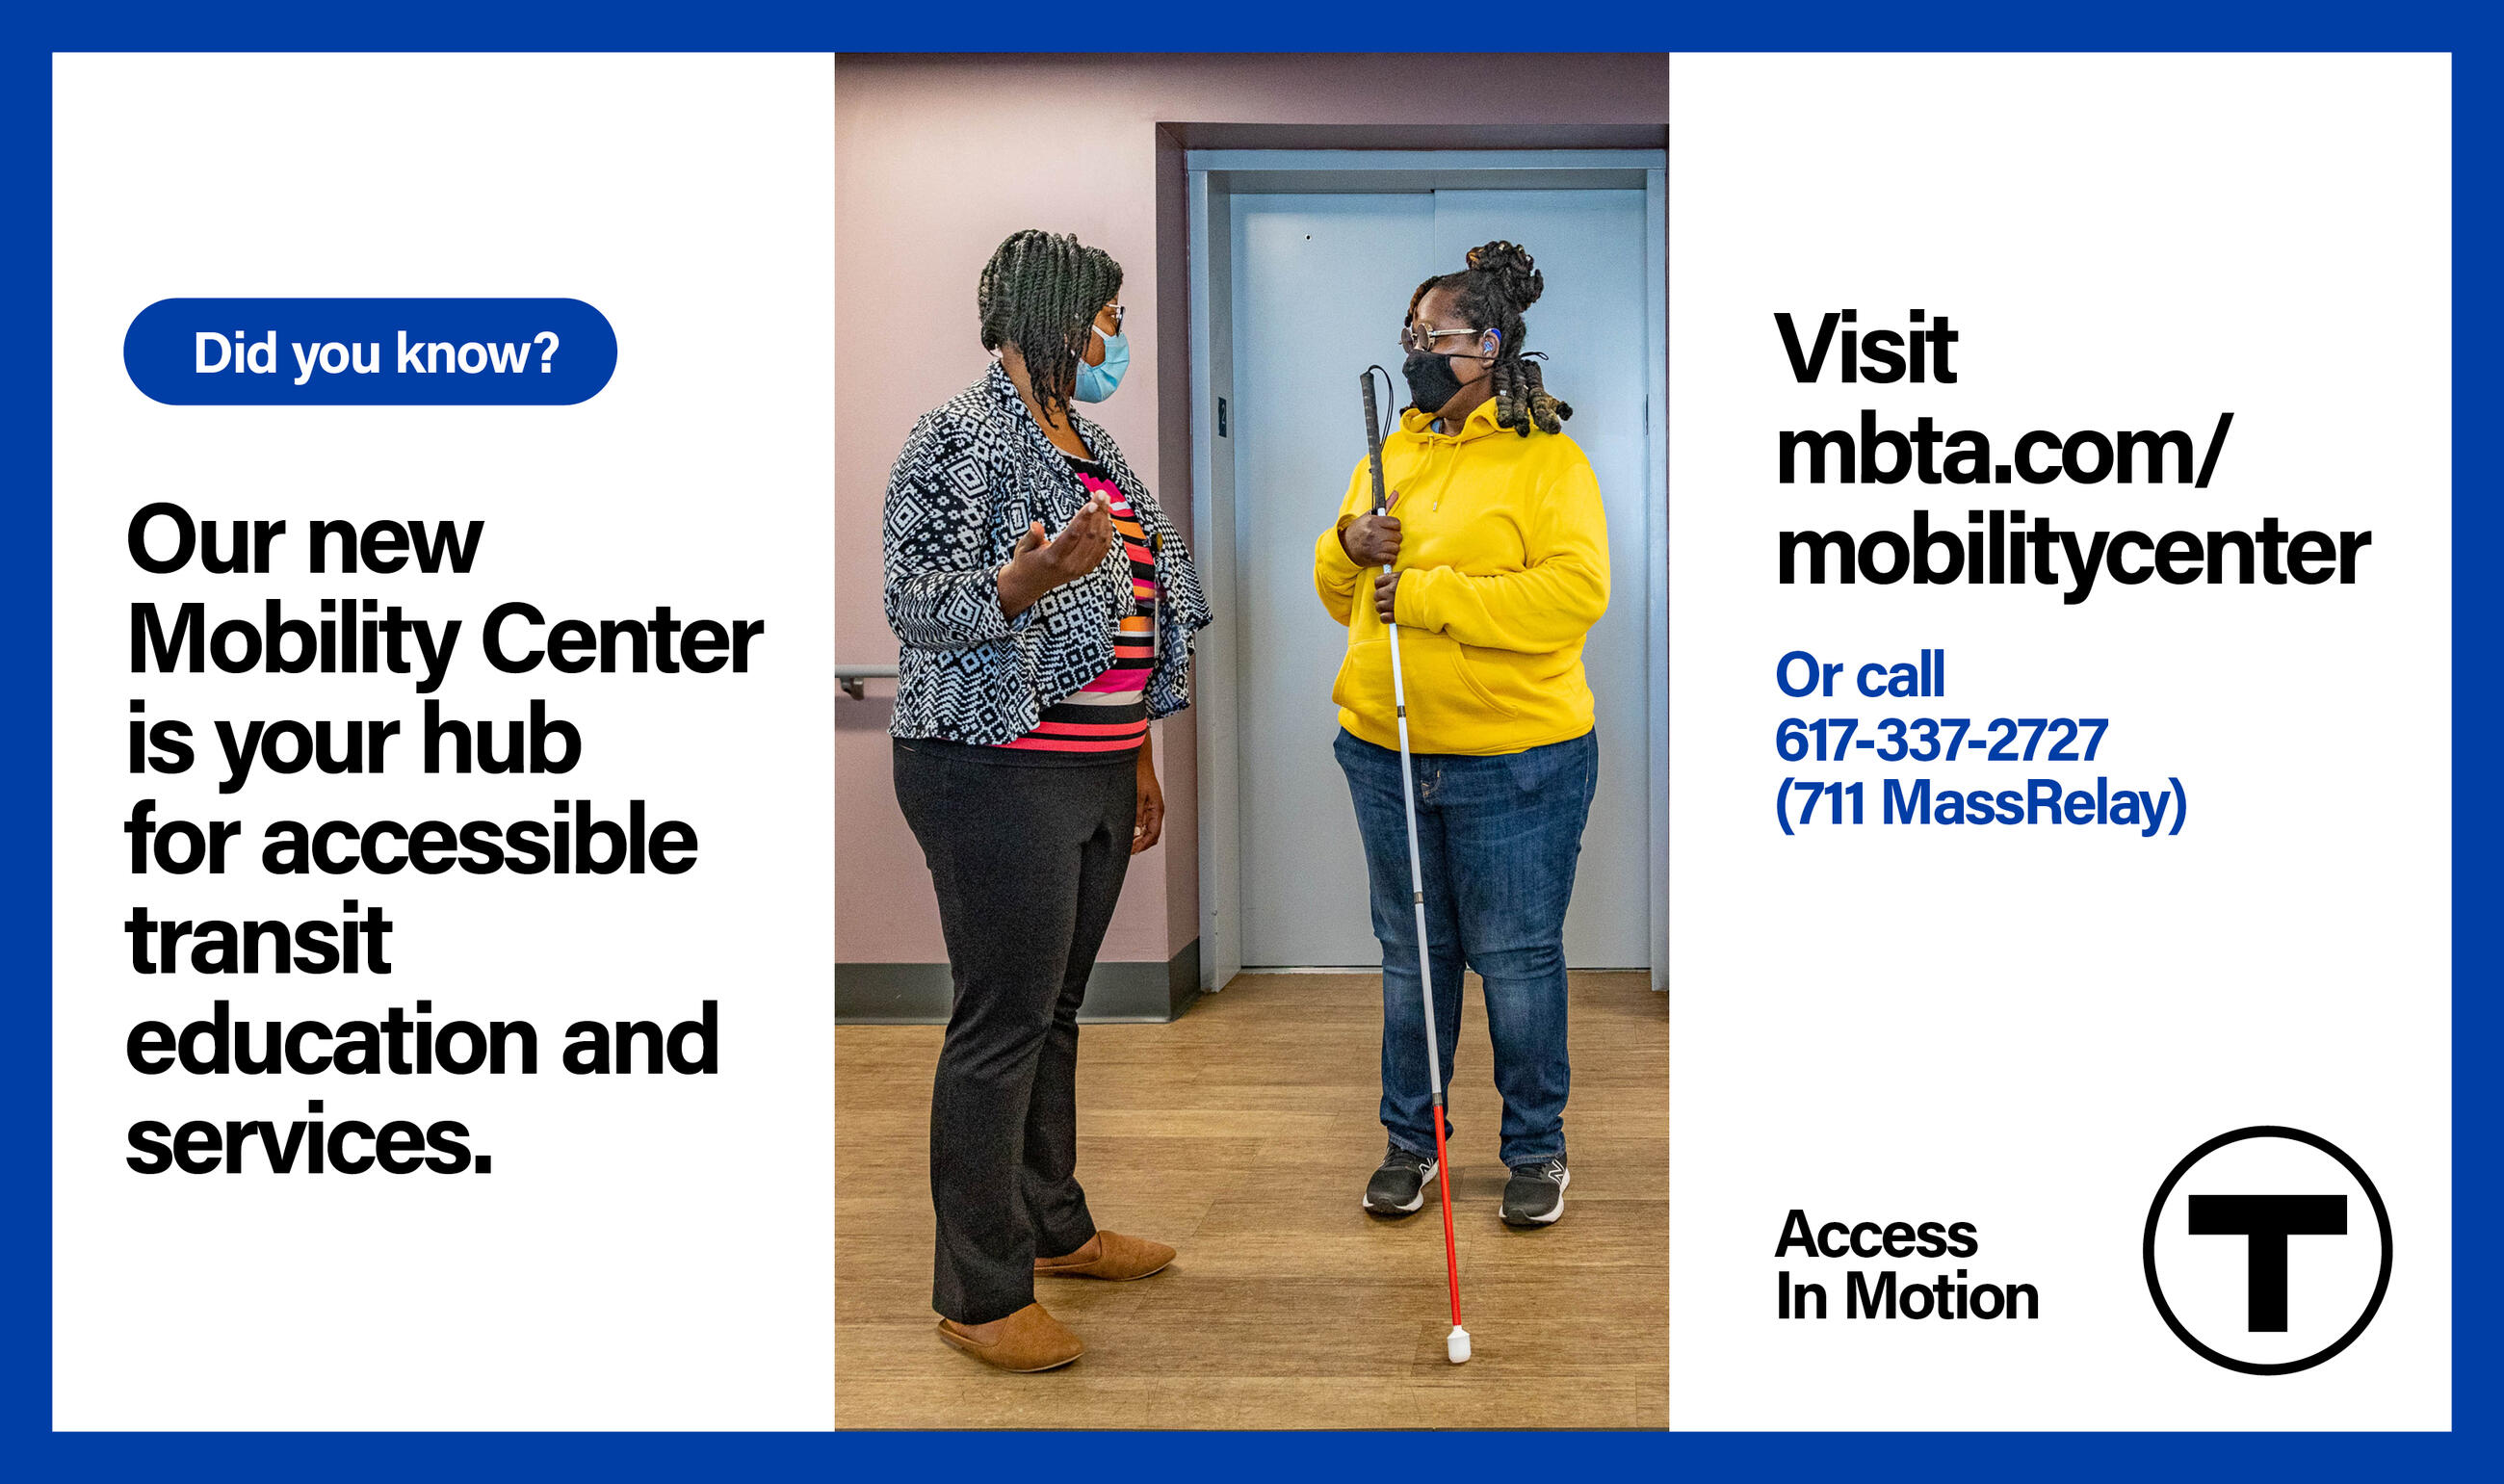 Center panel: Two African American women stand in a room, talking. One of the women is wearing sunglasses and using a white cane. Both are wearing masks. Right panel (text): “Did you know? Our new Mobility Center is your hub for accessible transit education and services.” Left panel (text): “Visit mbta.com/mobilitycenter. Or call 617-337-2727 (711 MassRelay)” followed by the “Access In Motion” tagline and the T logo.